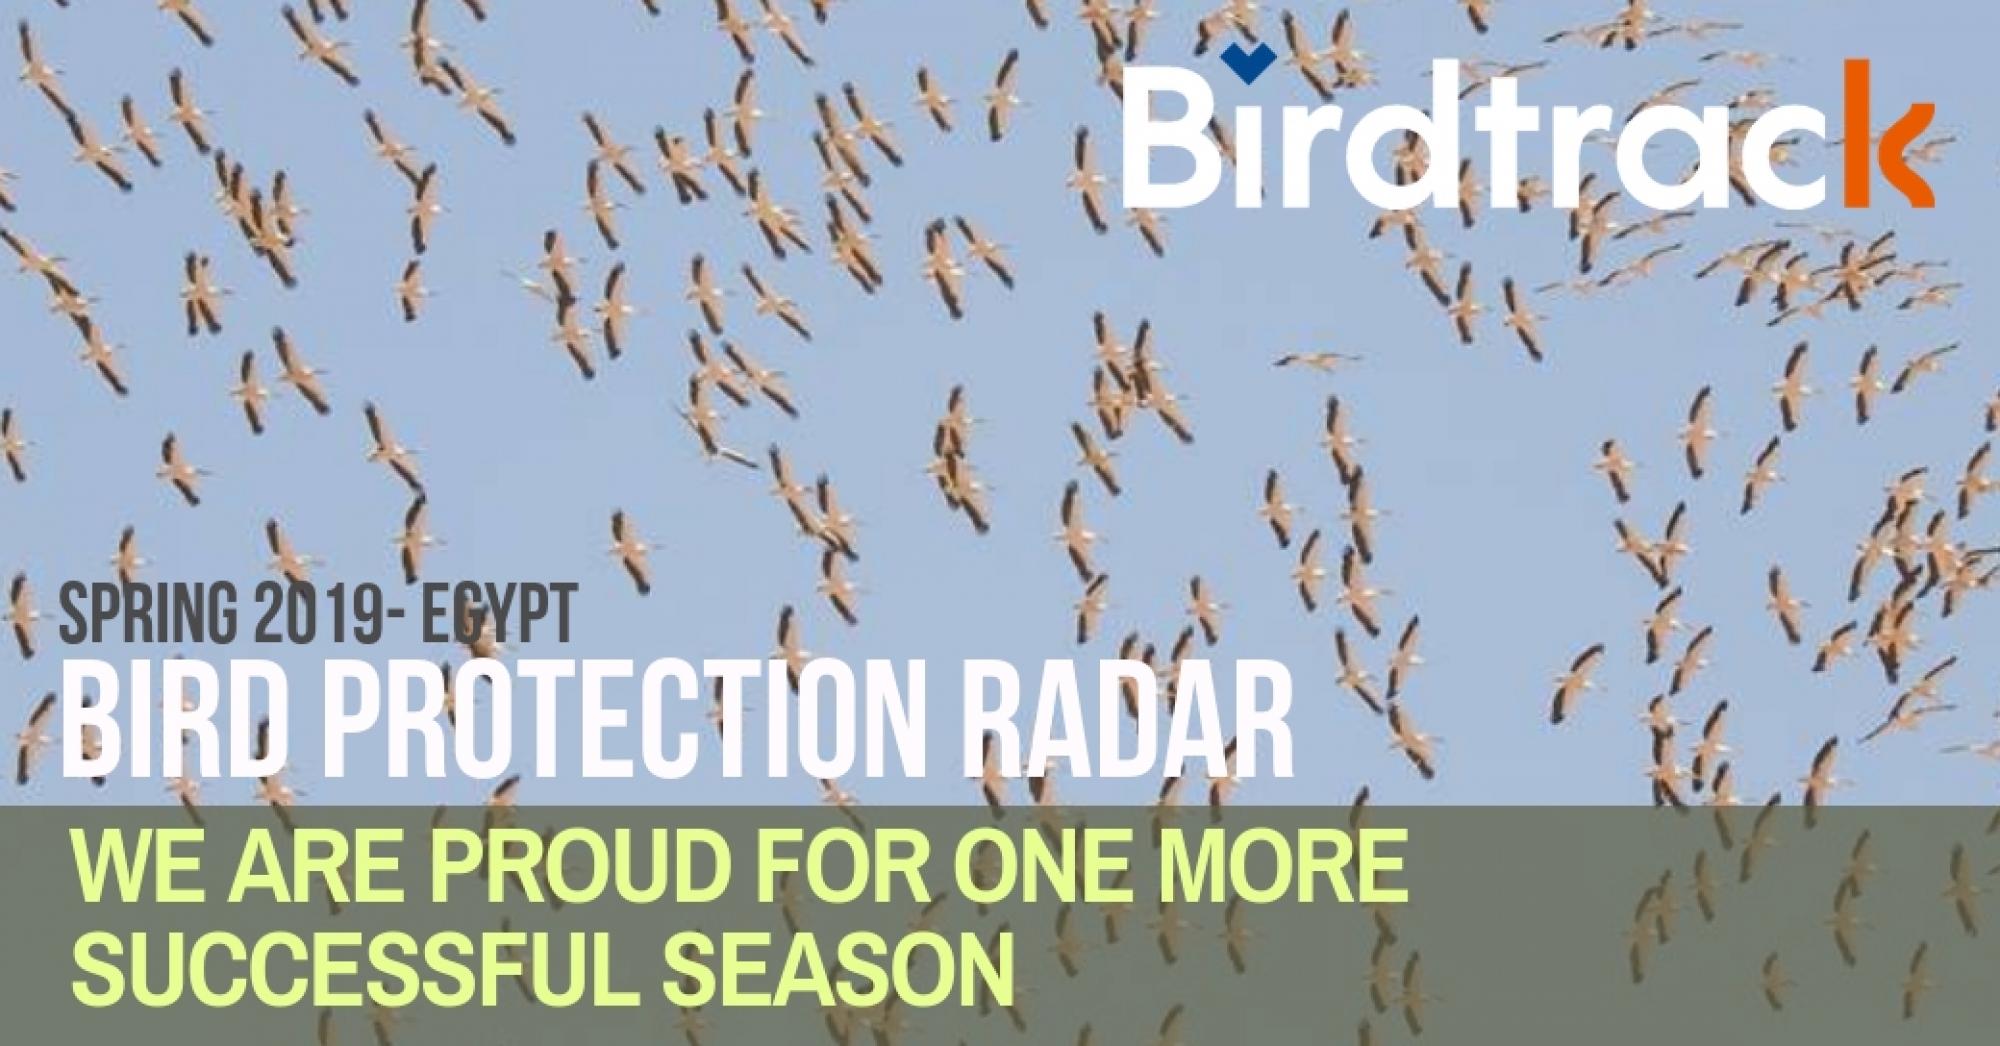 Birdtrack Campaign Successfully Completed